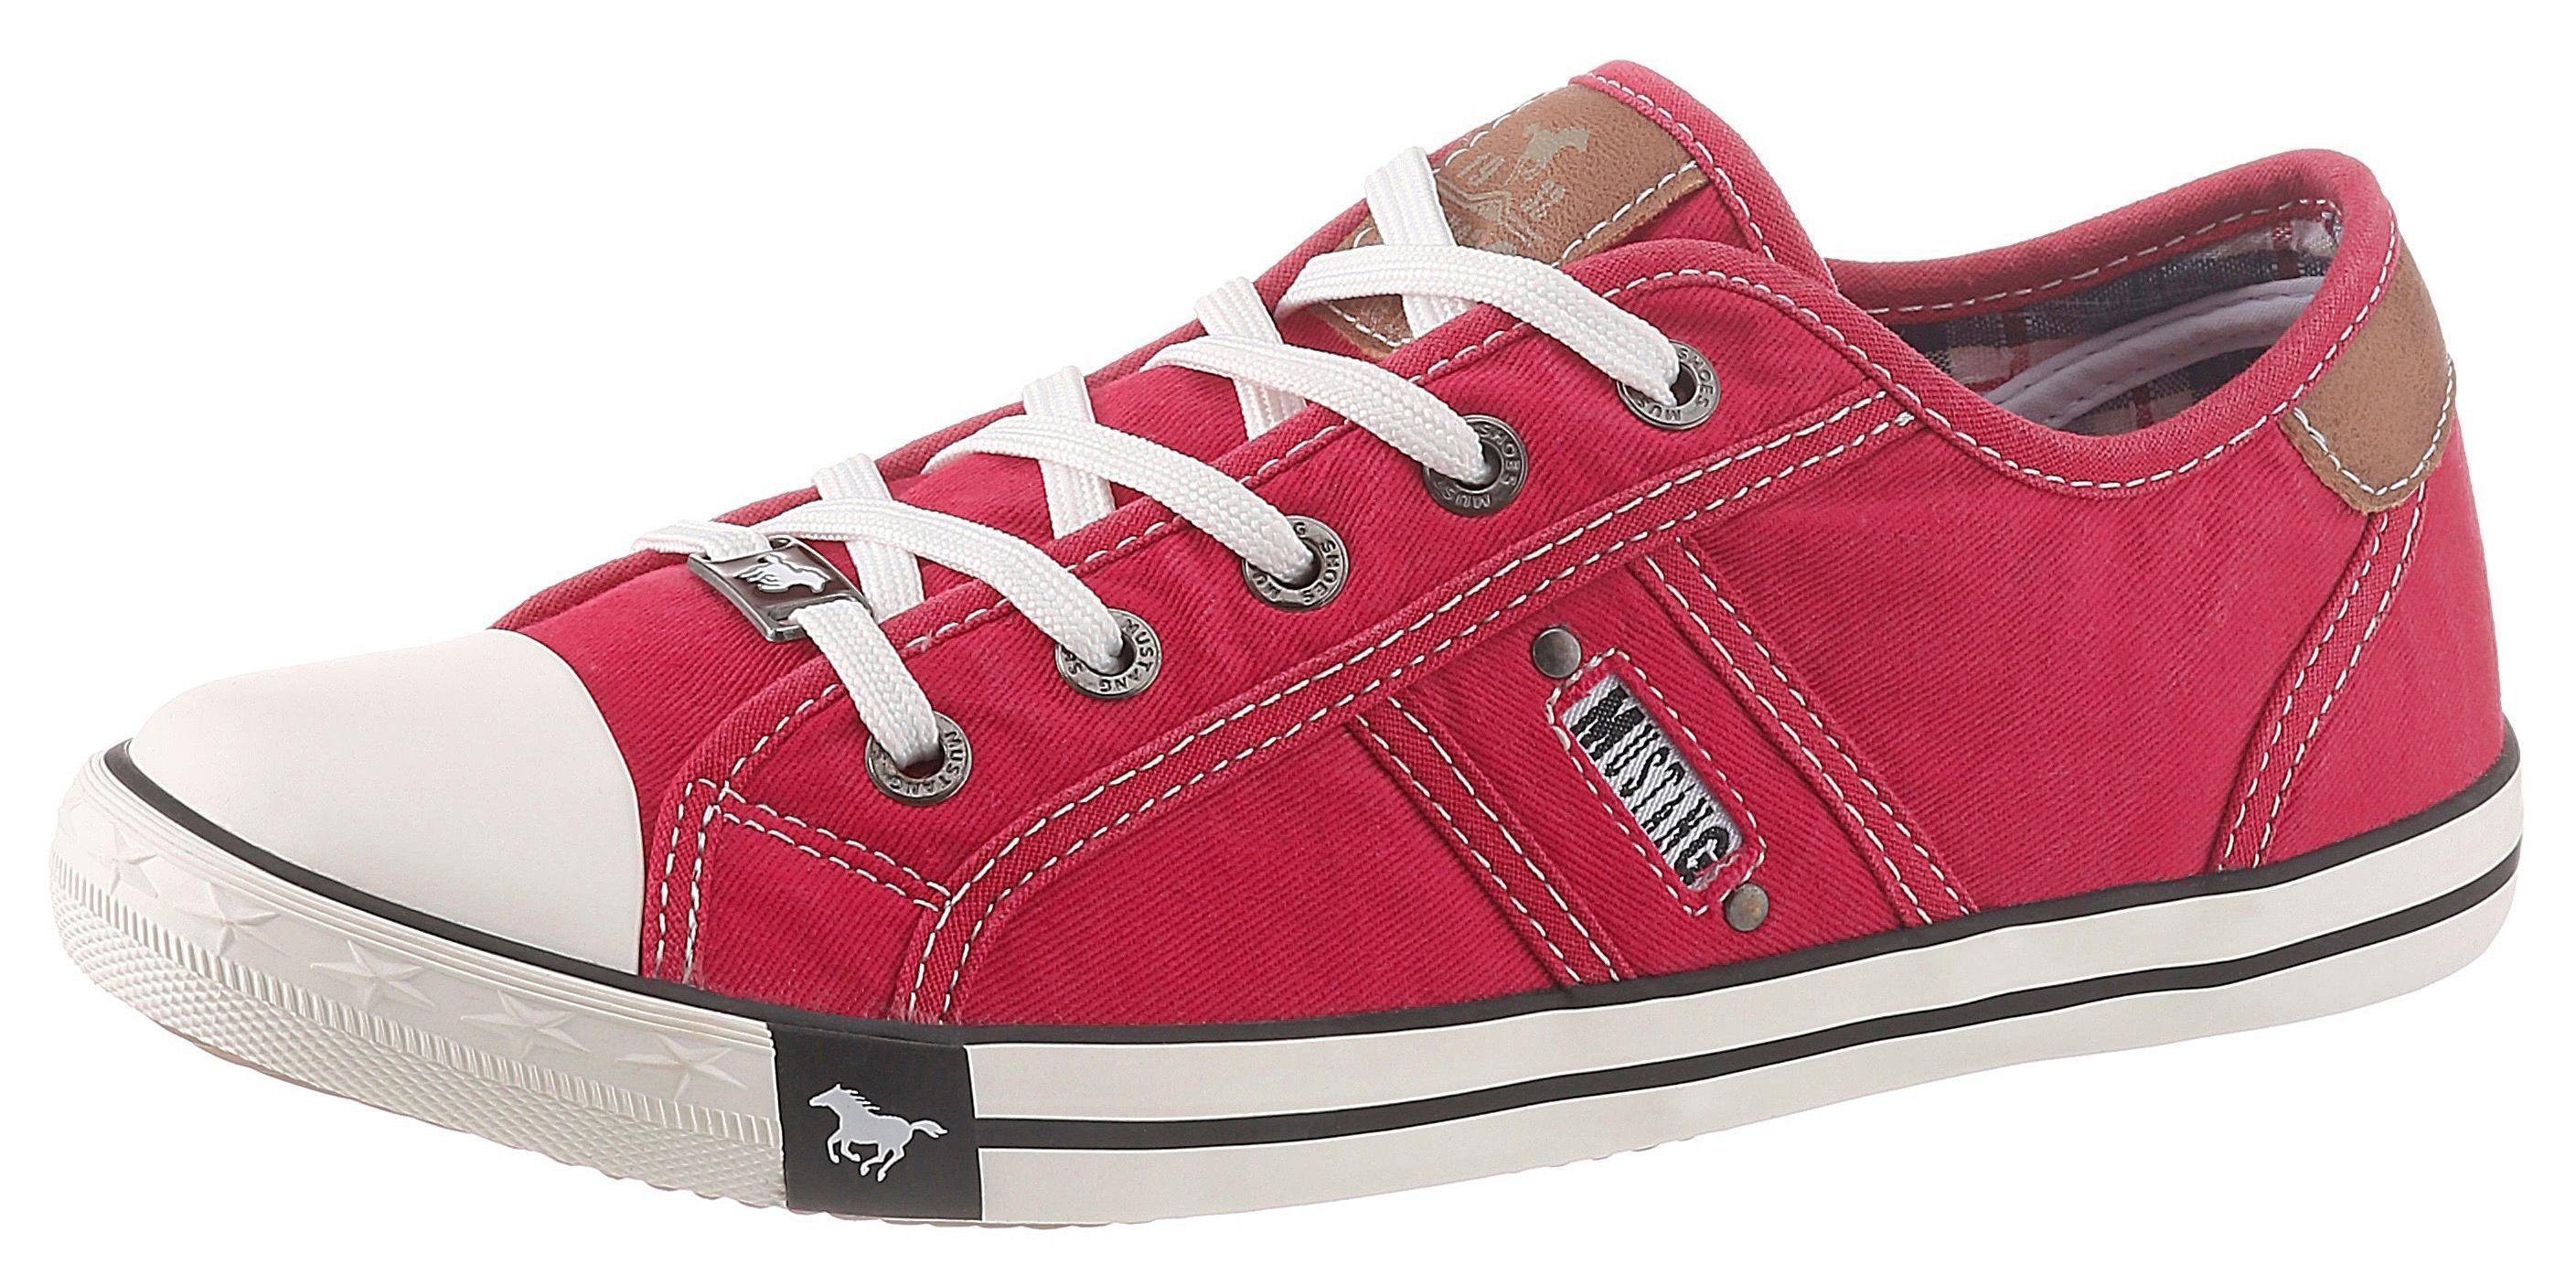 Mustang Markenlabel Sneaker Mustang Shoes rot mit